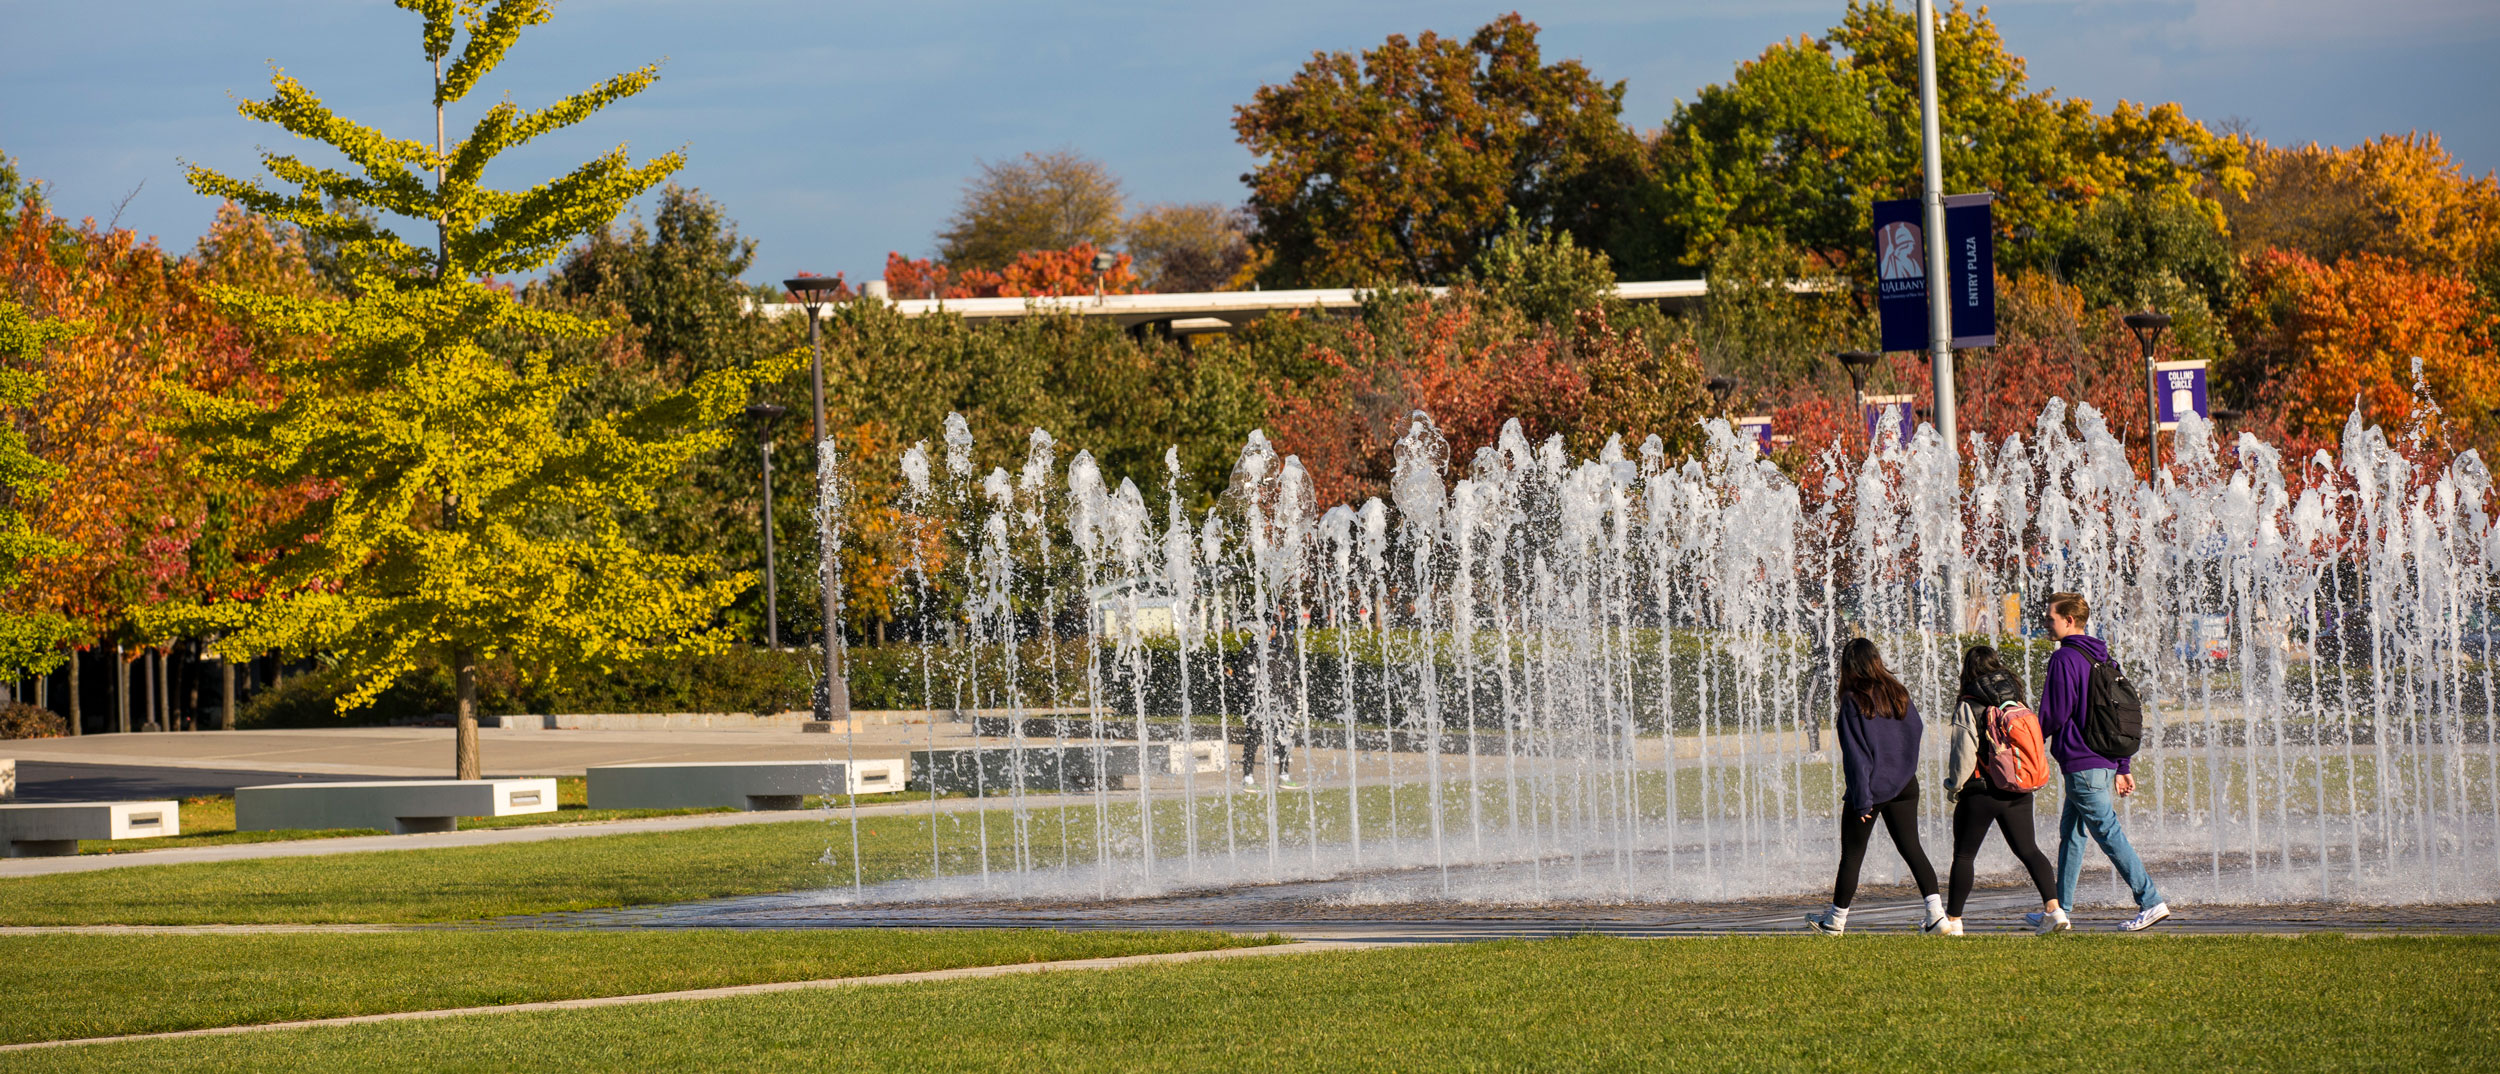 Three students with backpacks walk along a campus pathway next to a fountain.